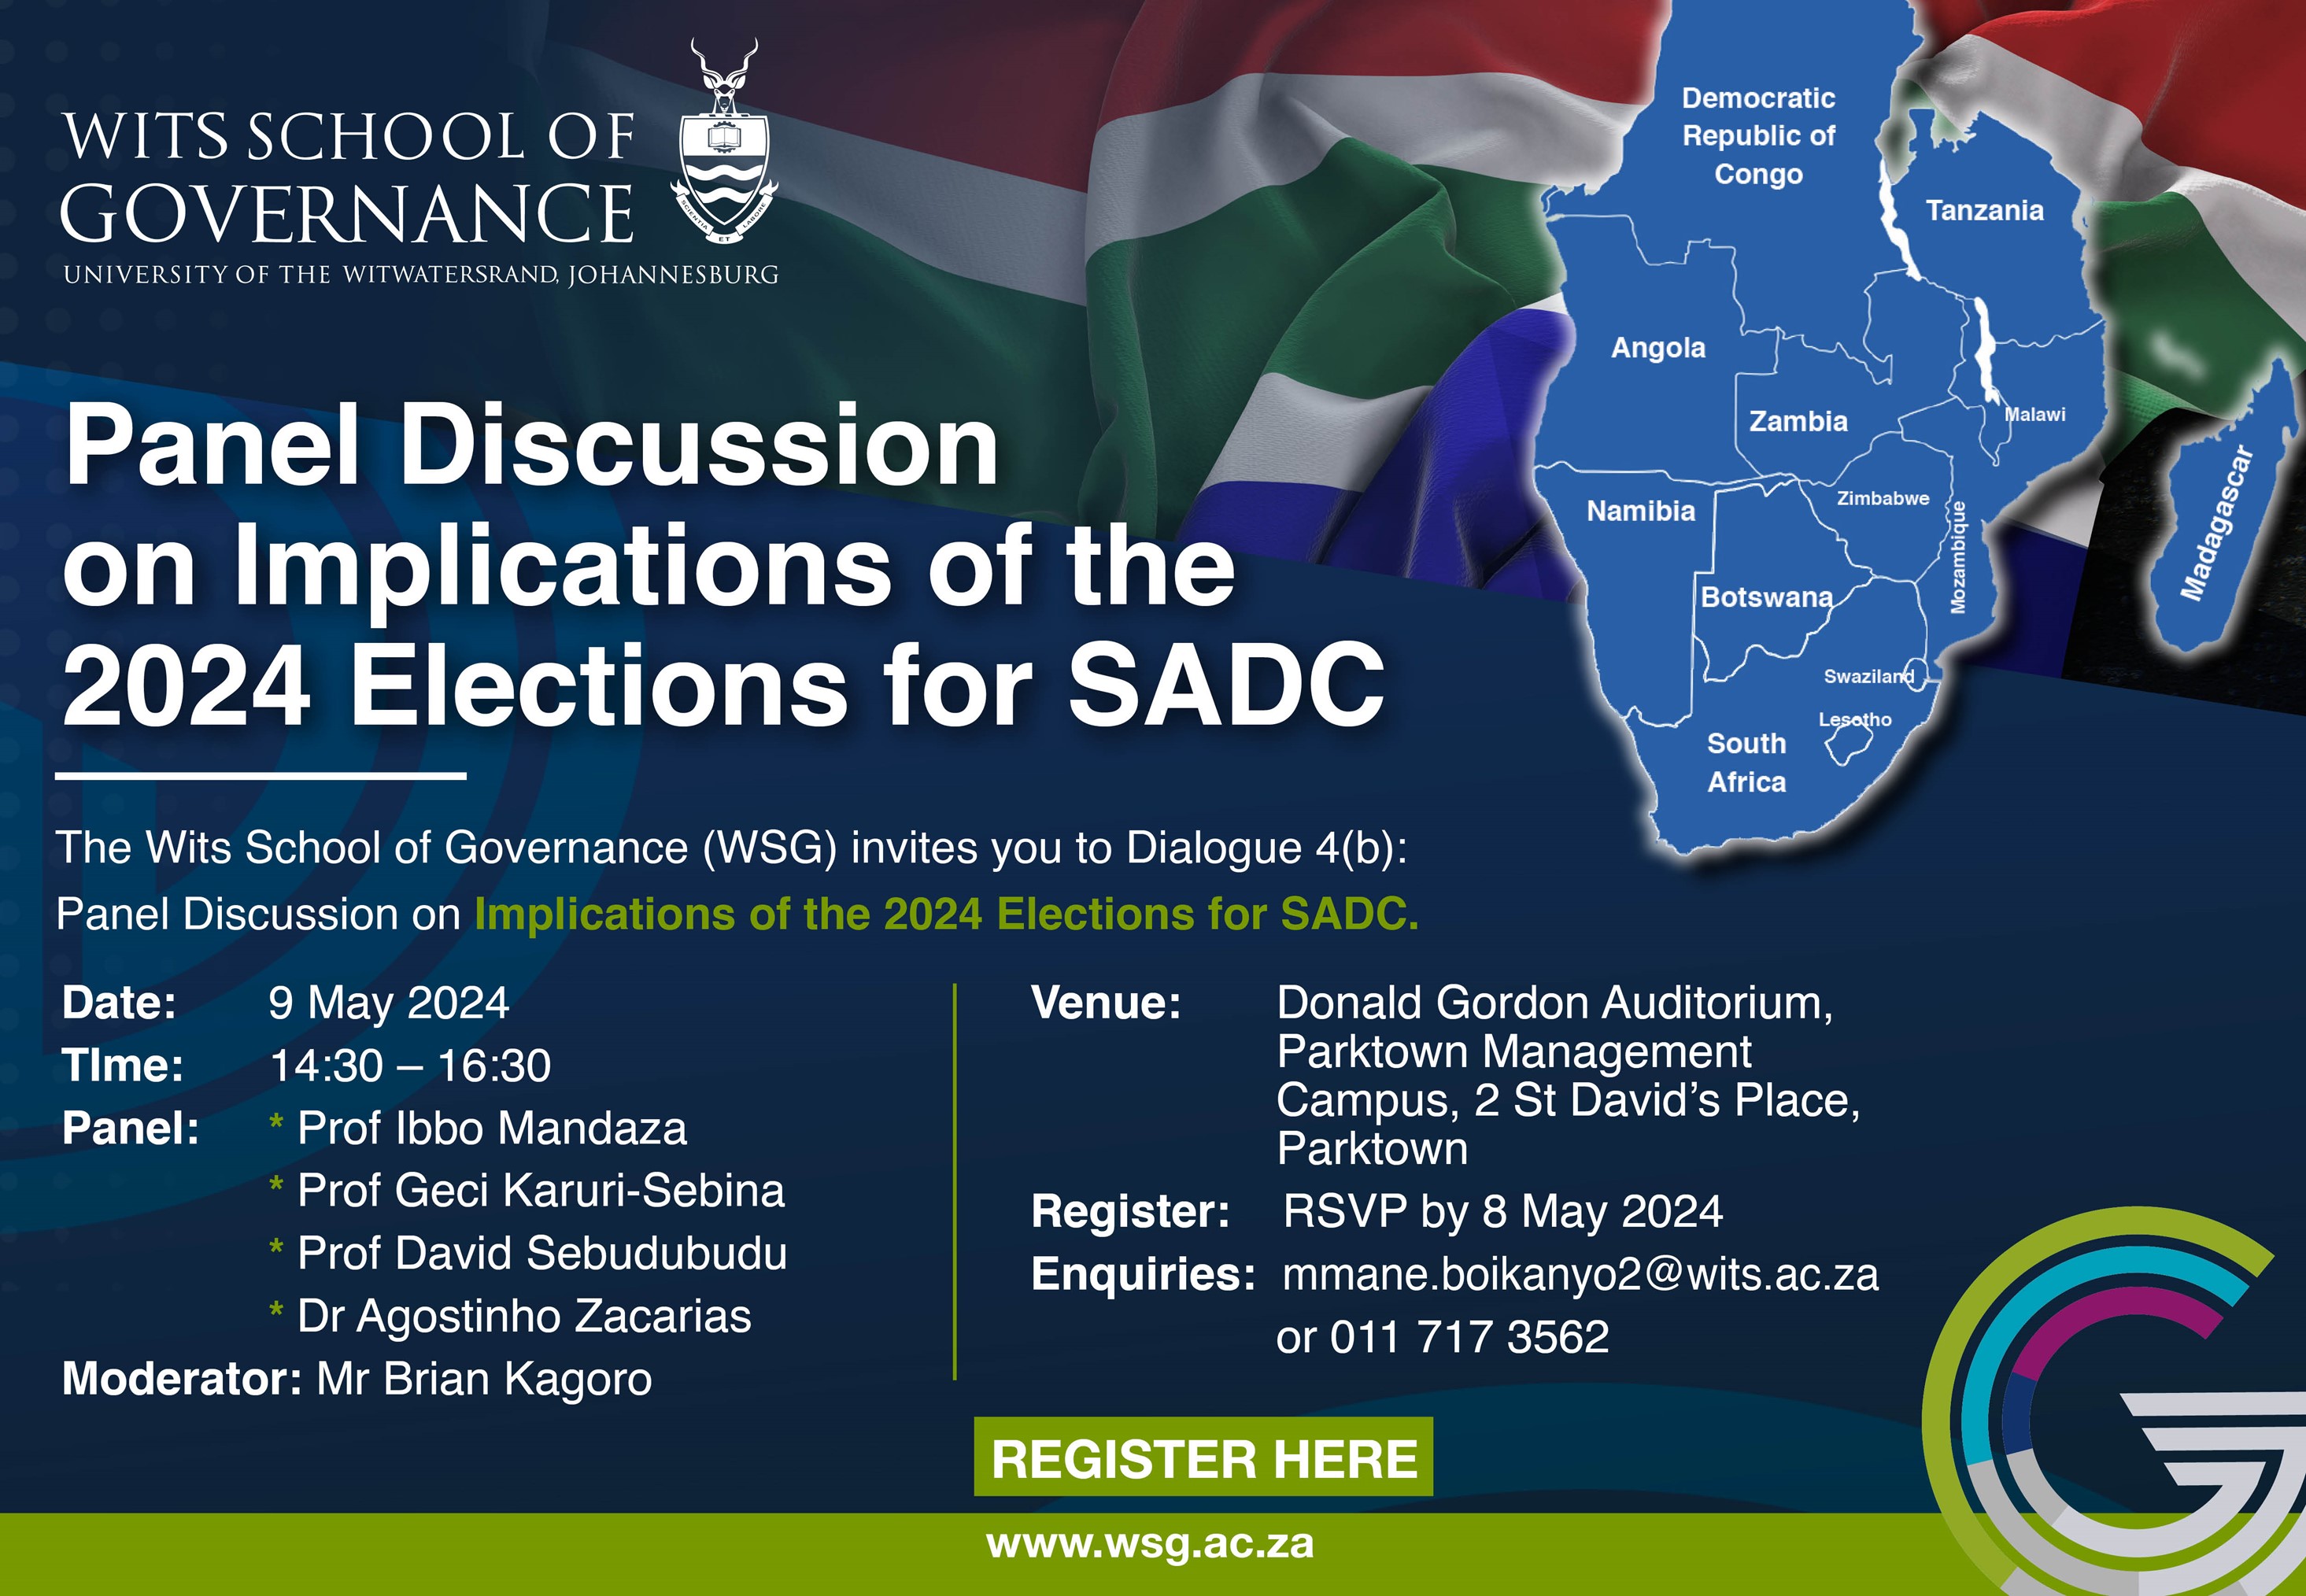 Panel Discussion on the Implications of the 2024 Elections for SADC